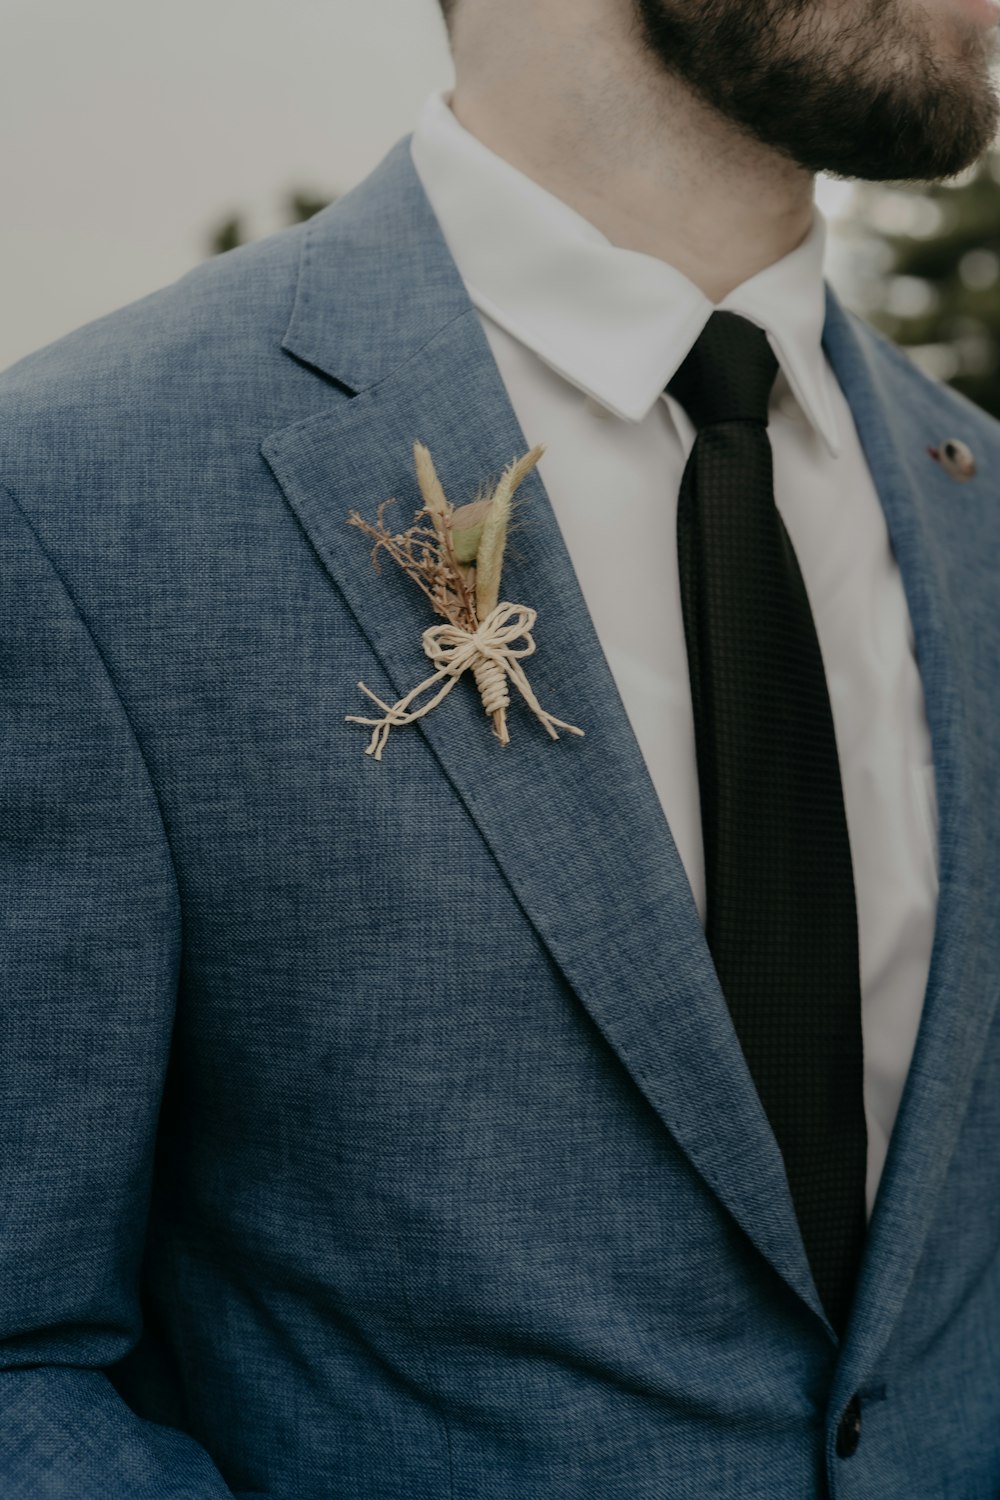 a man wearing a suit and tie with a boutonniere